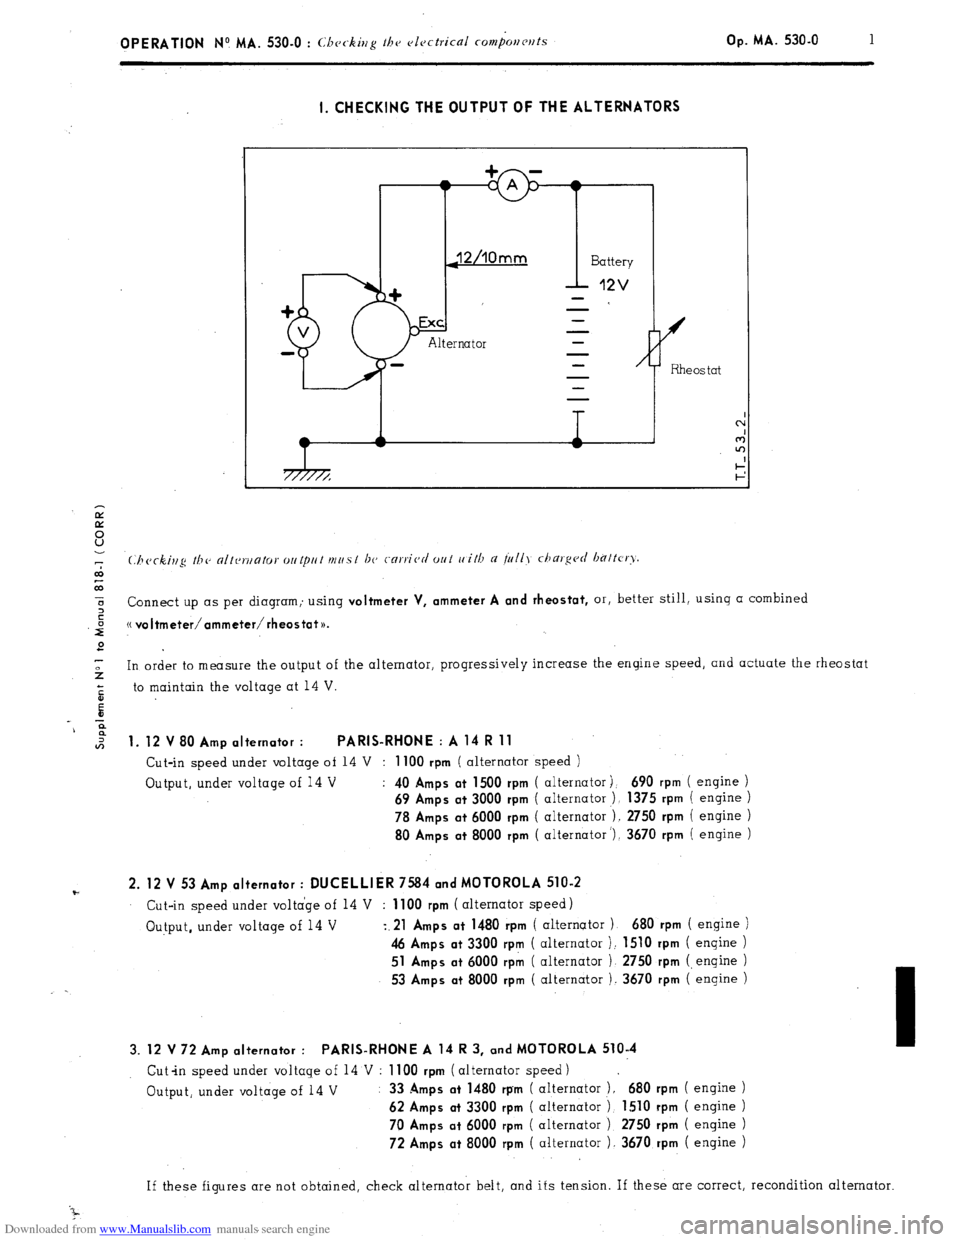 Citroen CX 1985 1.G Workshop Manual Downloaded from www.Manualslib.com manuals search engine OPERATION N9 MA. 530.0 : Cbcc-king thv c)lcctrical com&r~cr~ts Op. MA. 530.0 1 
I. CHECKING THE OUTPUT OF THE ALTERNATORS 
7 
co 
co 
5 or, bet